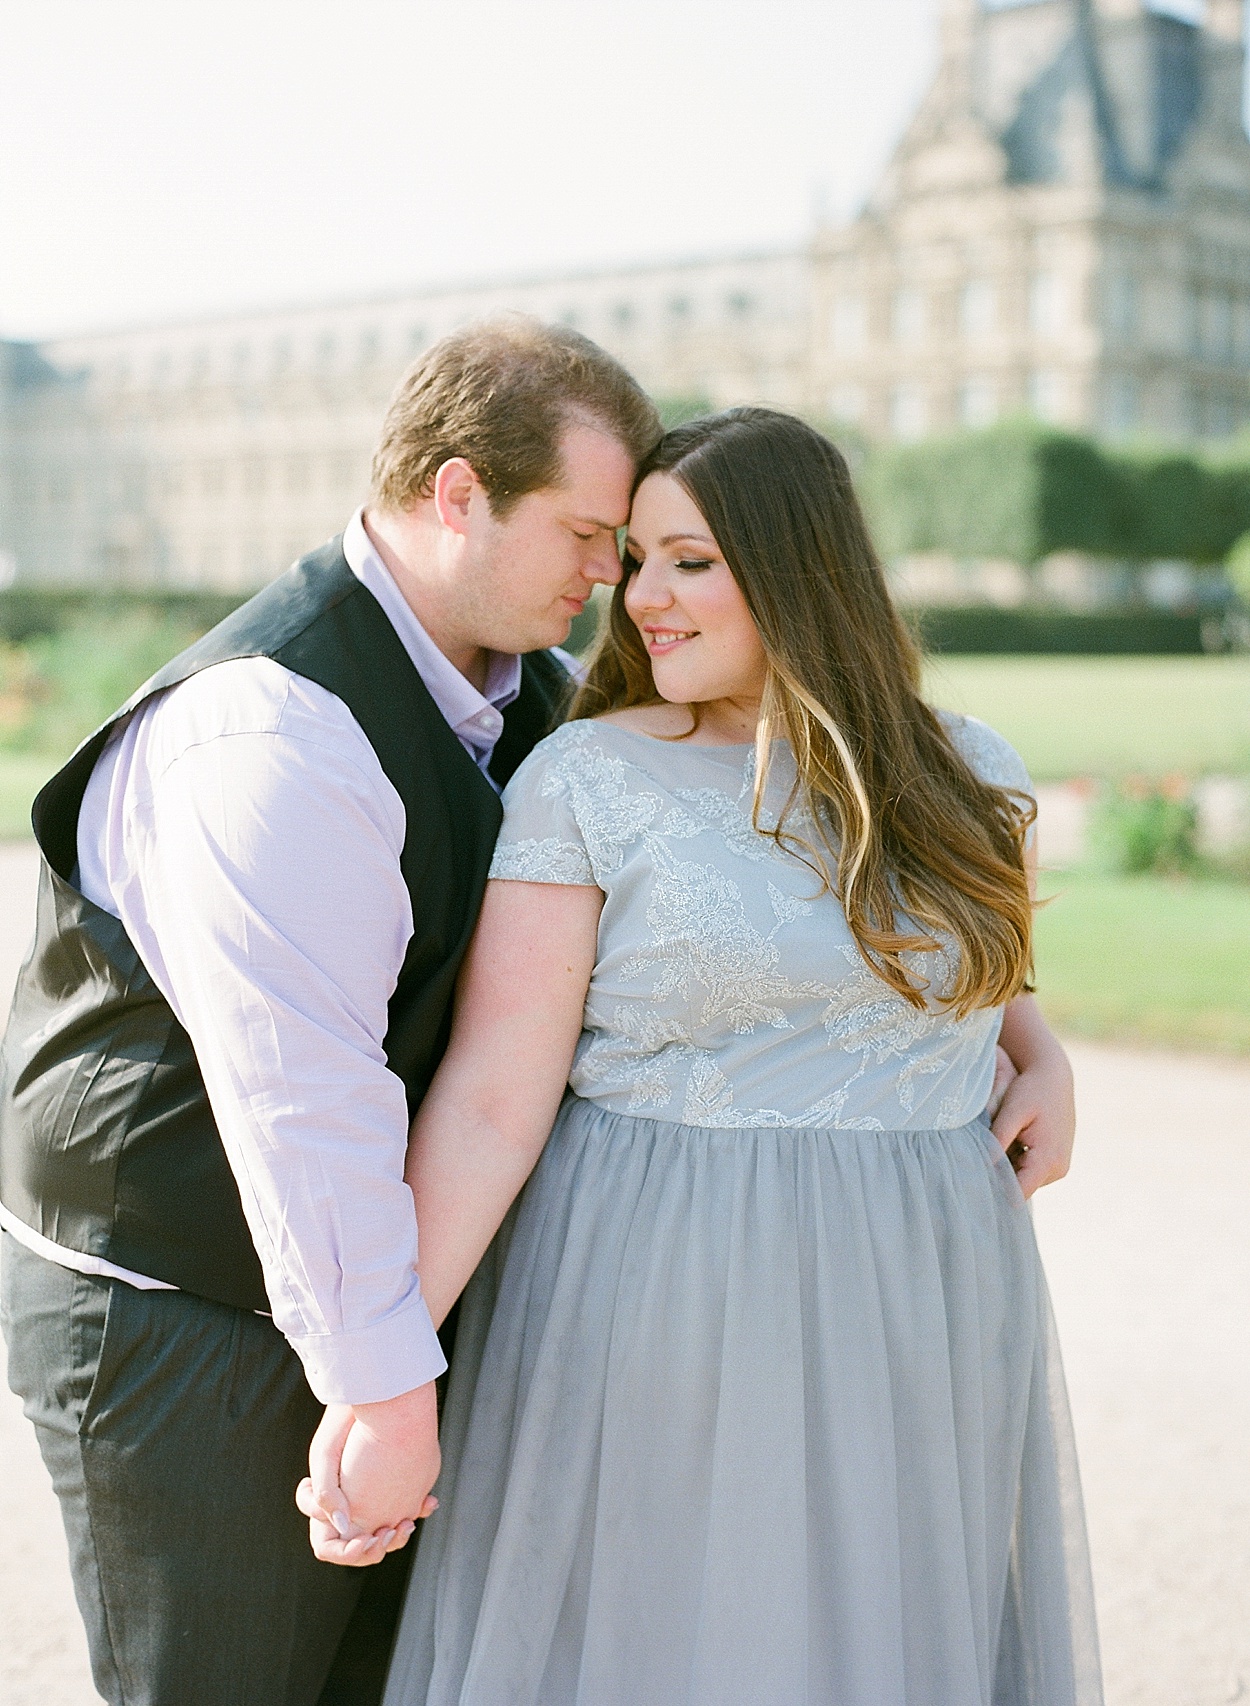 Paris engagement photo at the Tuileries Garden | by Abby Grace